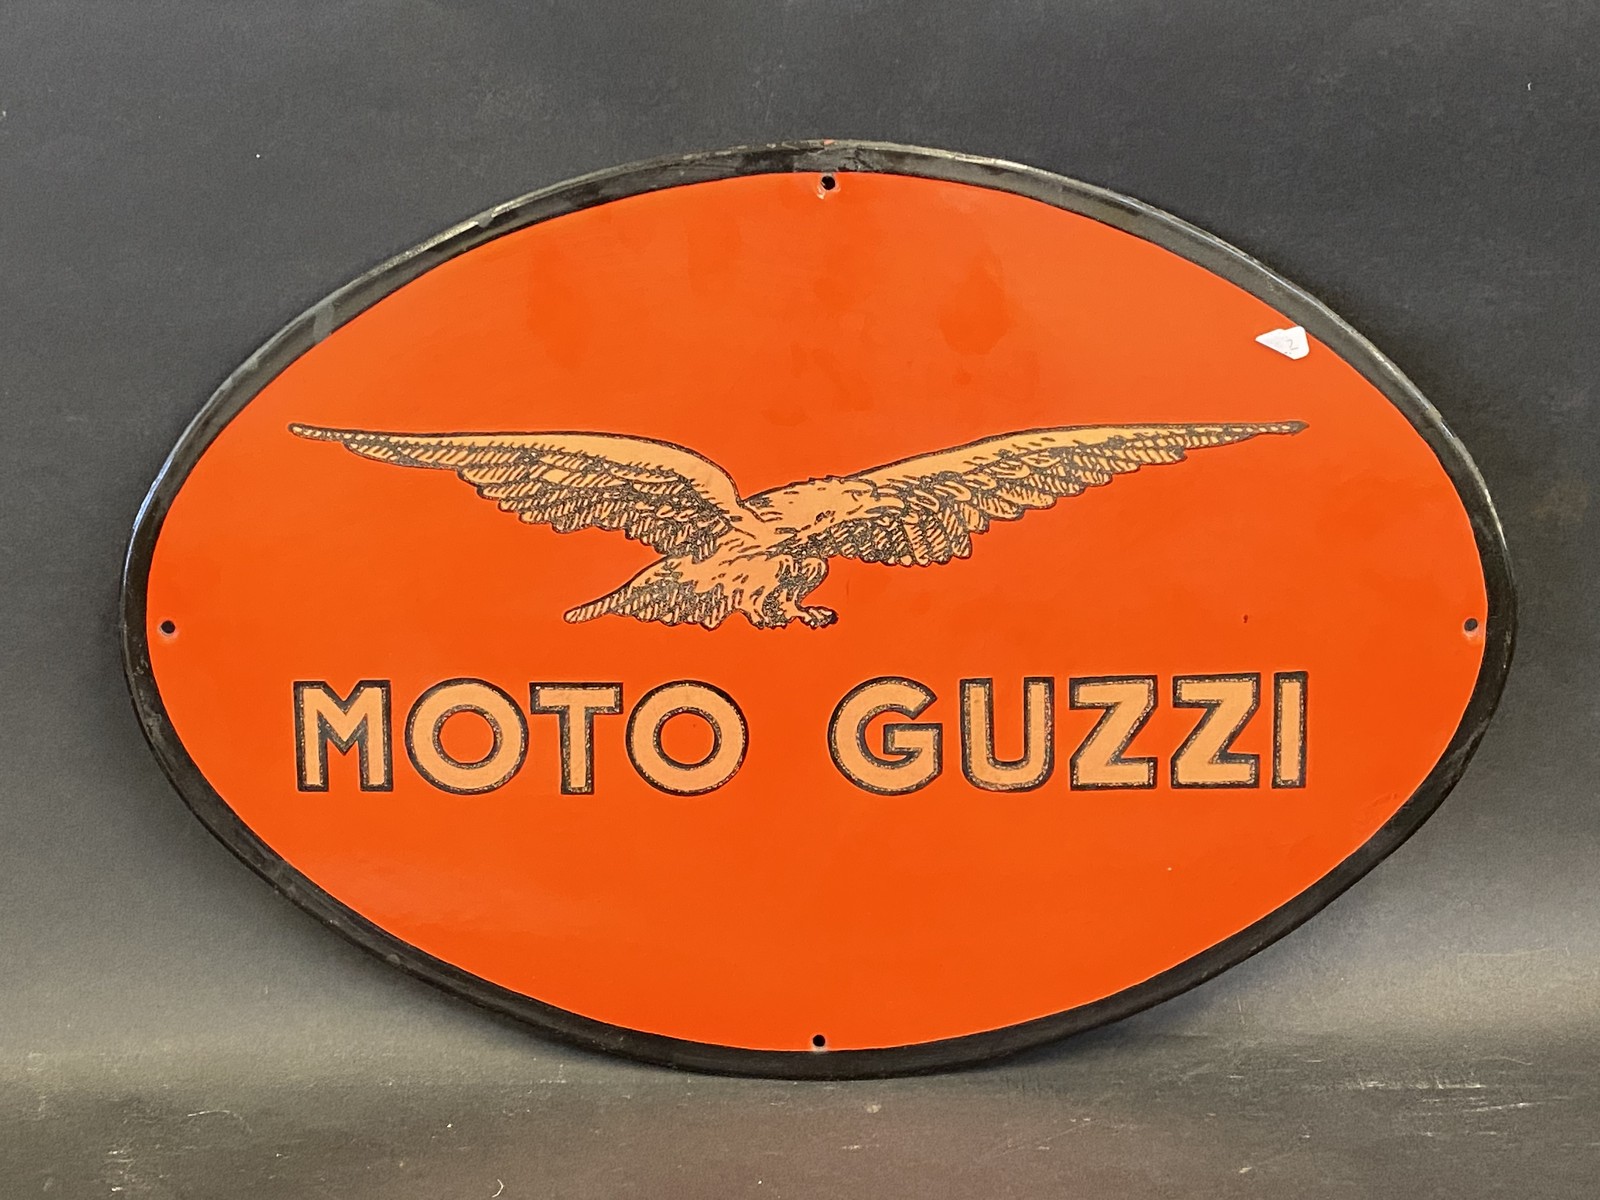 A reproduction Moto Guzzi oval advertising sign, 18 1/2 x 12 3/4".